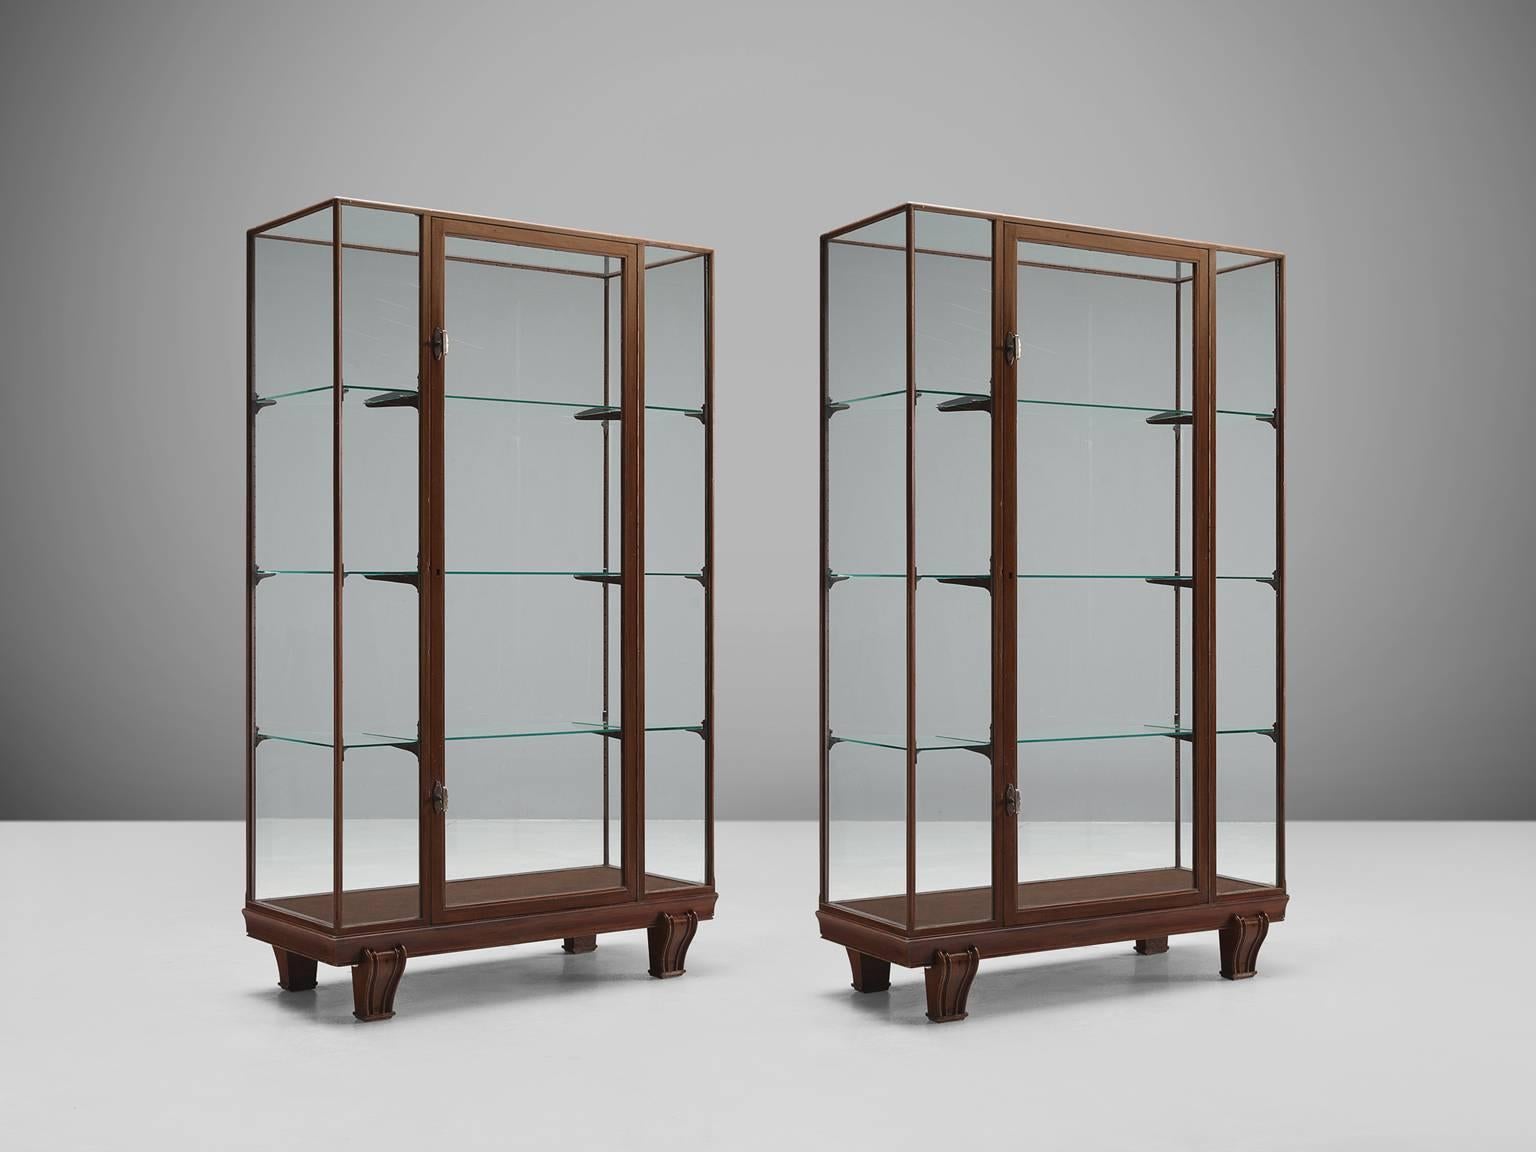 Pair of vitrines, wood, glass, steel, Europe, 1960s.

Sturdy and Minimalist showcases in glass and wood. The base of this vitrine is beautifully simply designed as it features a wooden foot that is built up of four sturdy feet. The middle panel